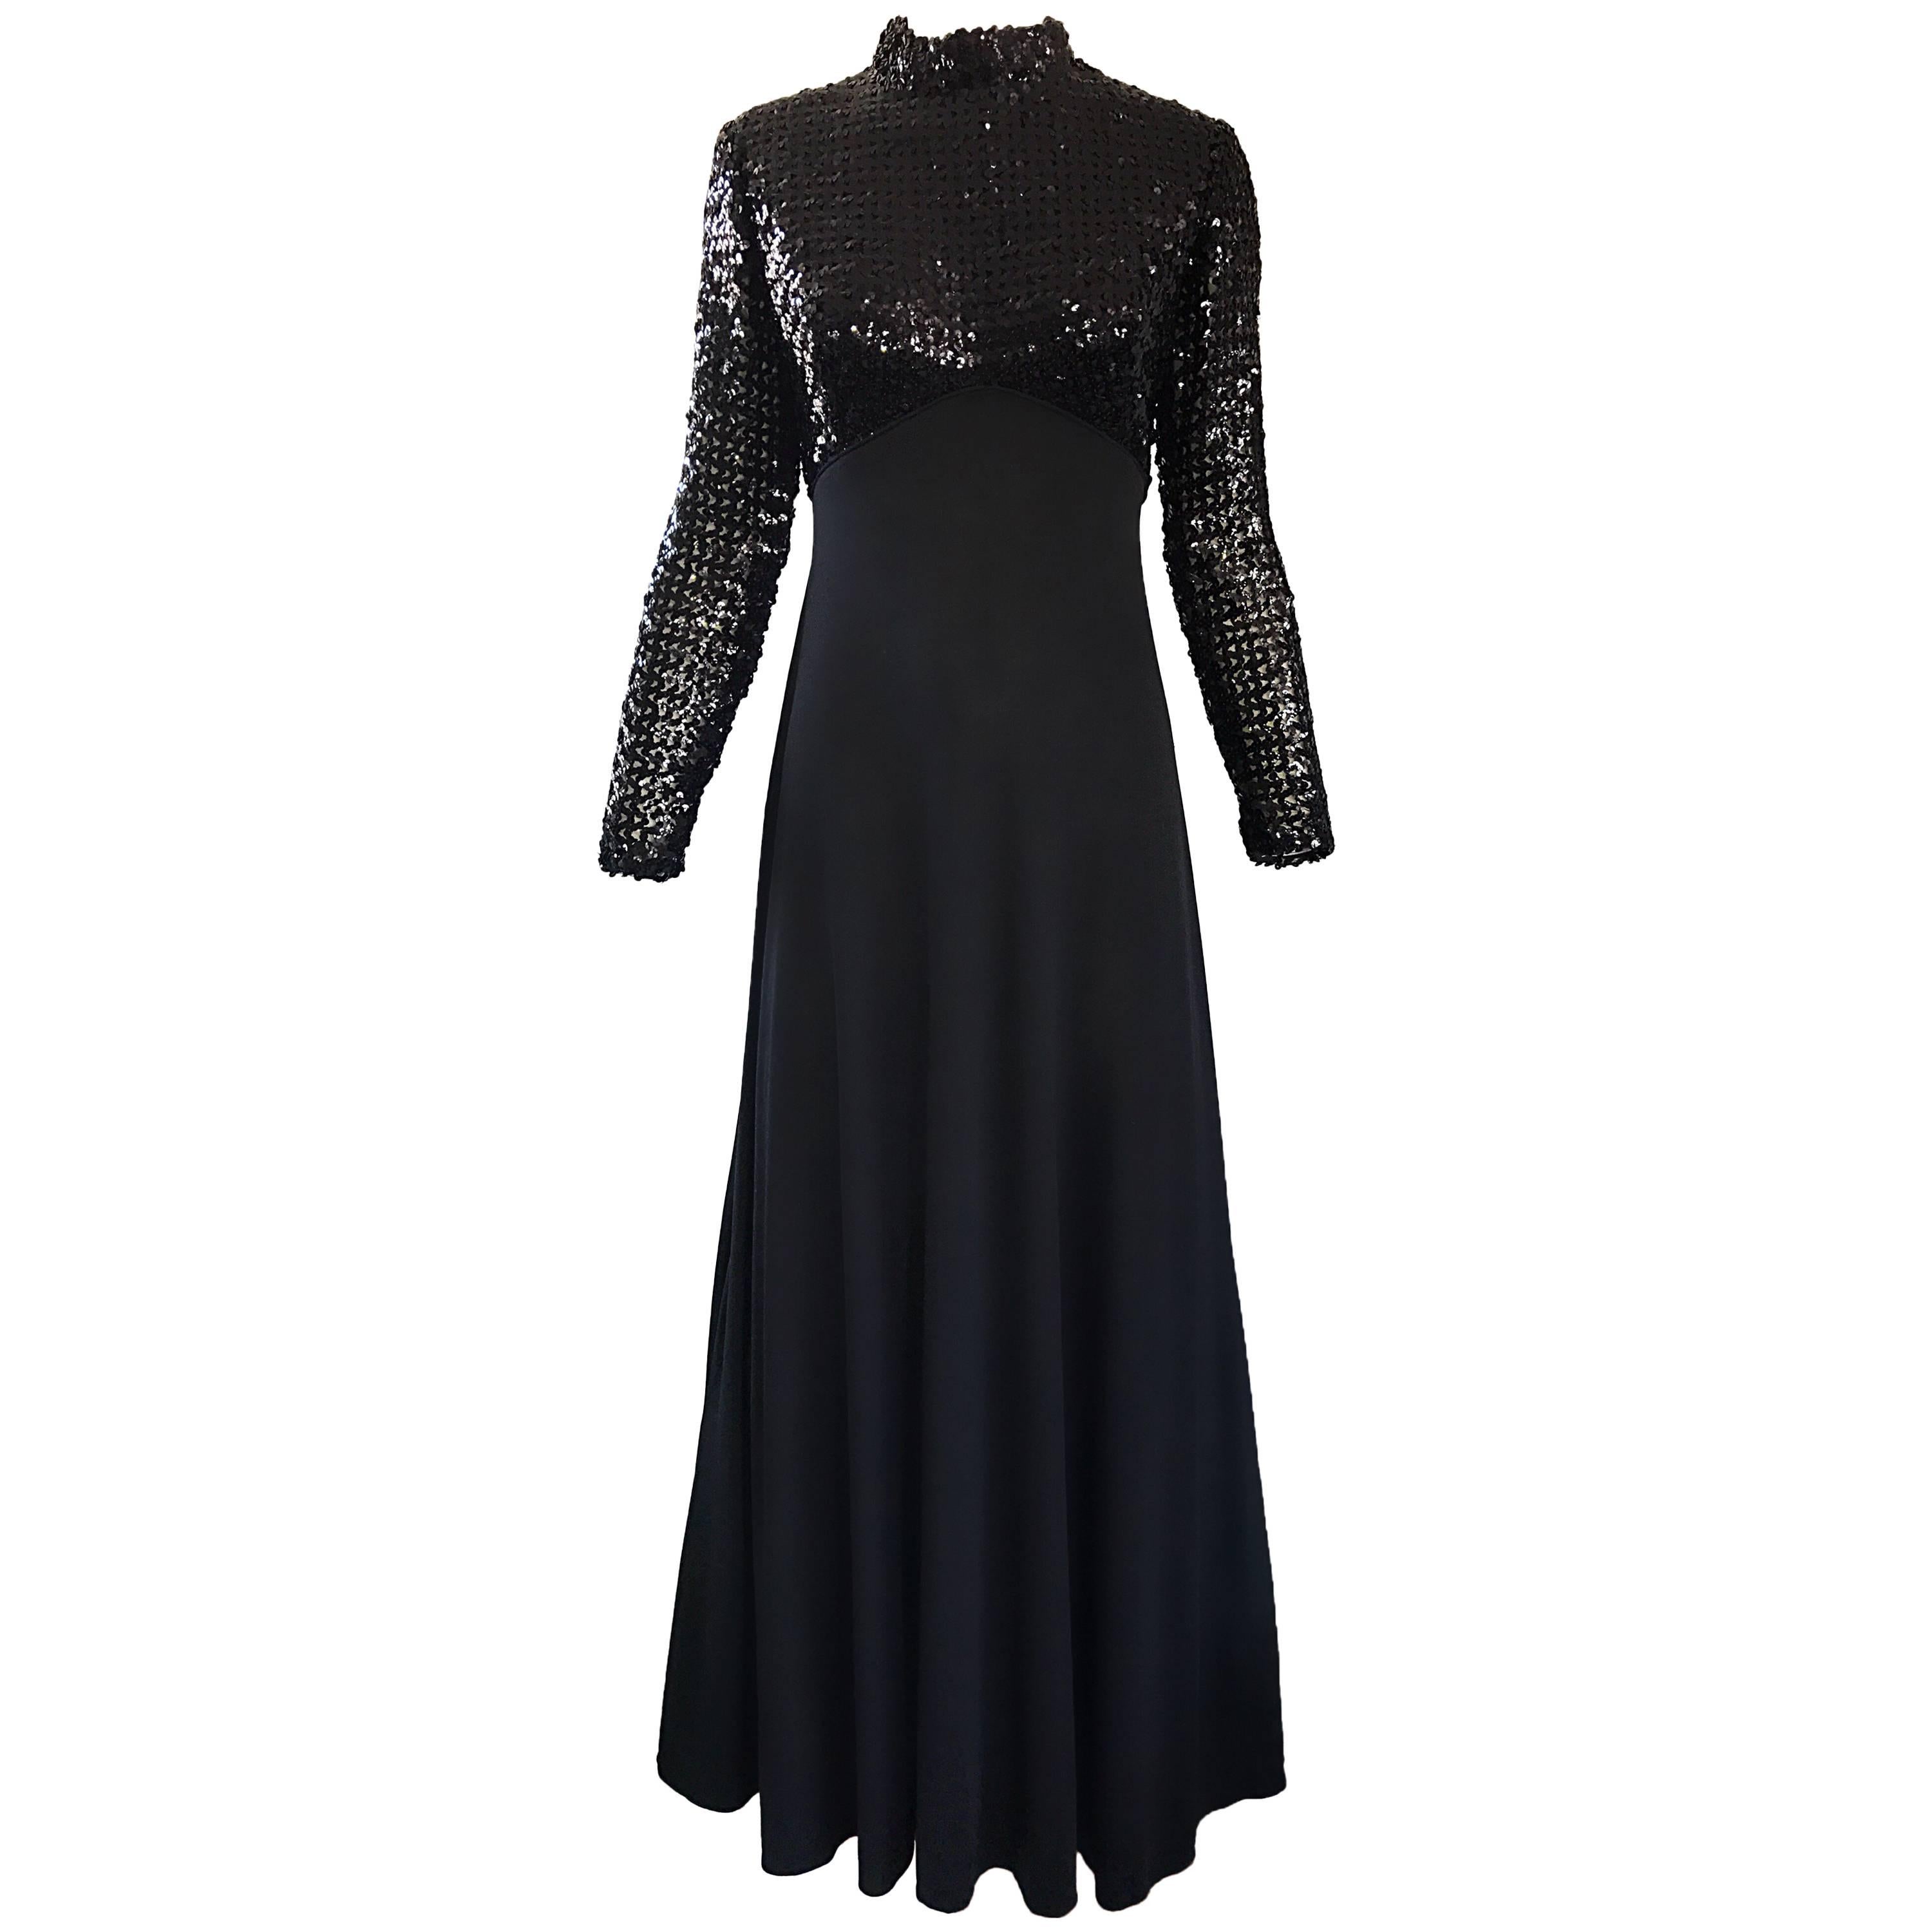 Amazing 1970s Black Sequin Long Sleeve High Neck Vintage 70s Jersey Evening Gown